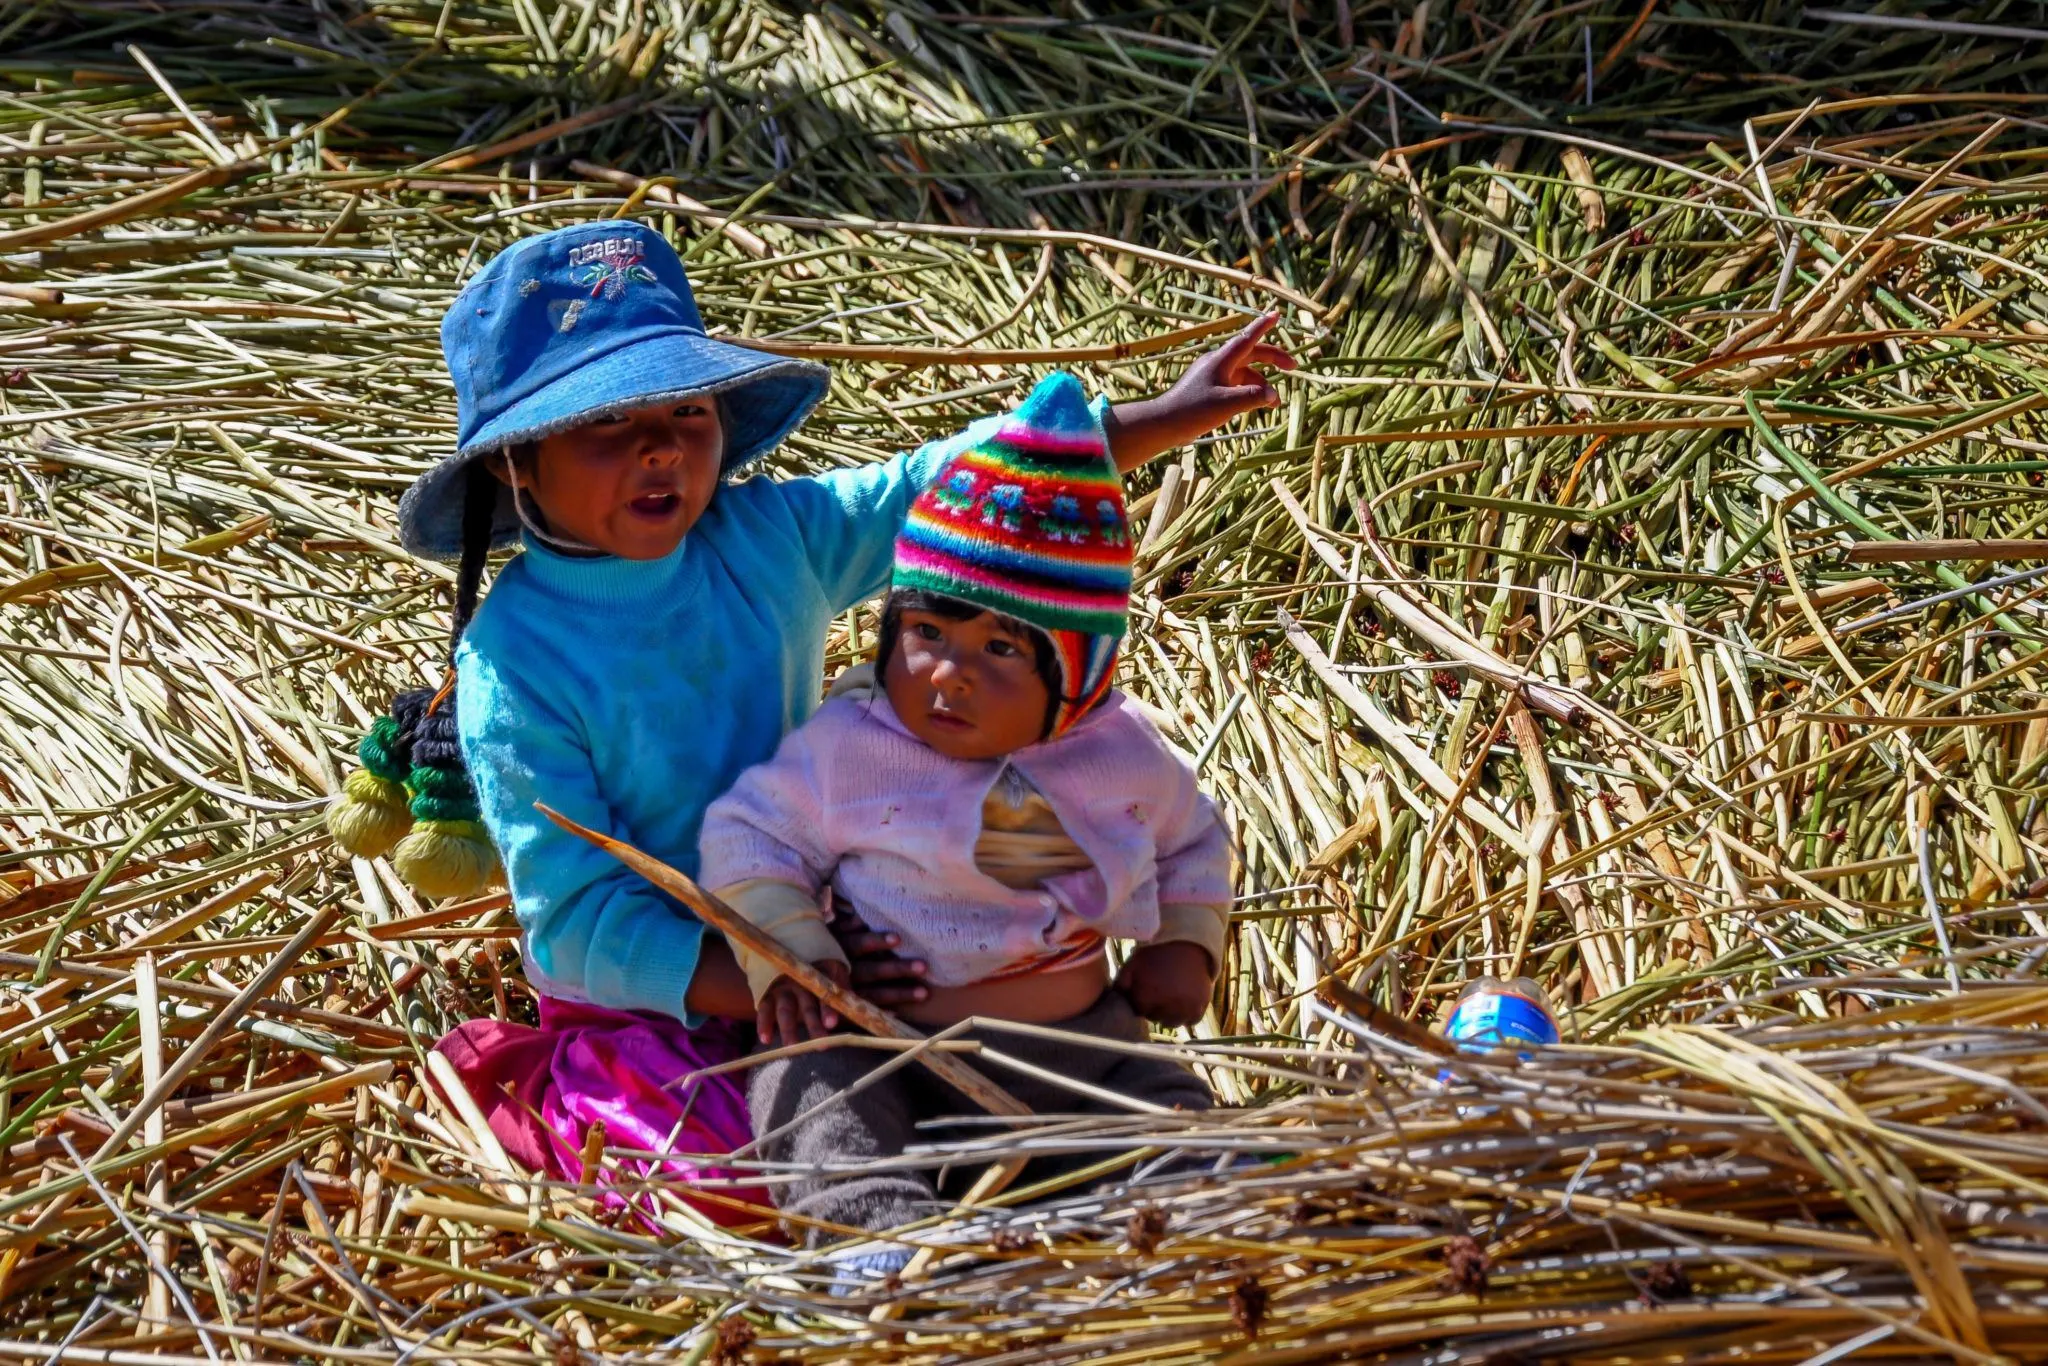 Two young children playing in Peru